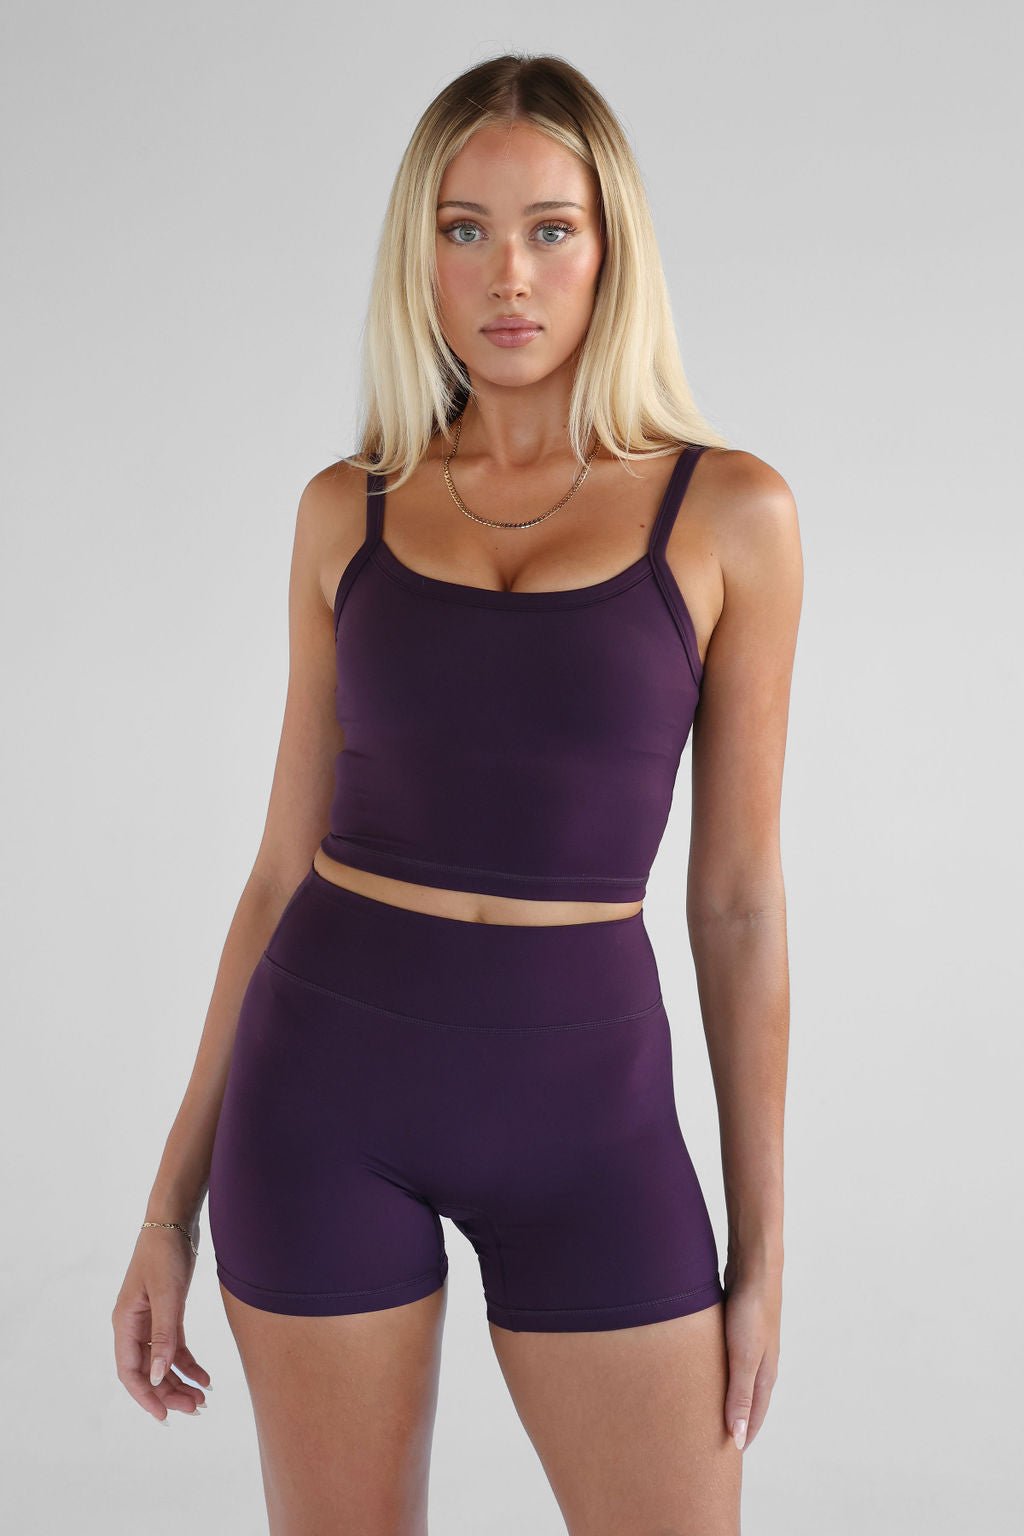 SIGNATURE Tank - Plum SHIPPING FROM 12/02 - LEELO ACTIVE